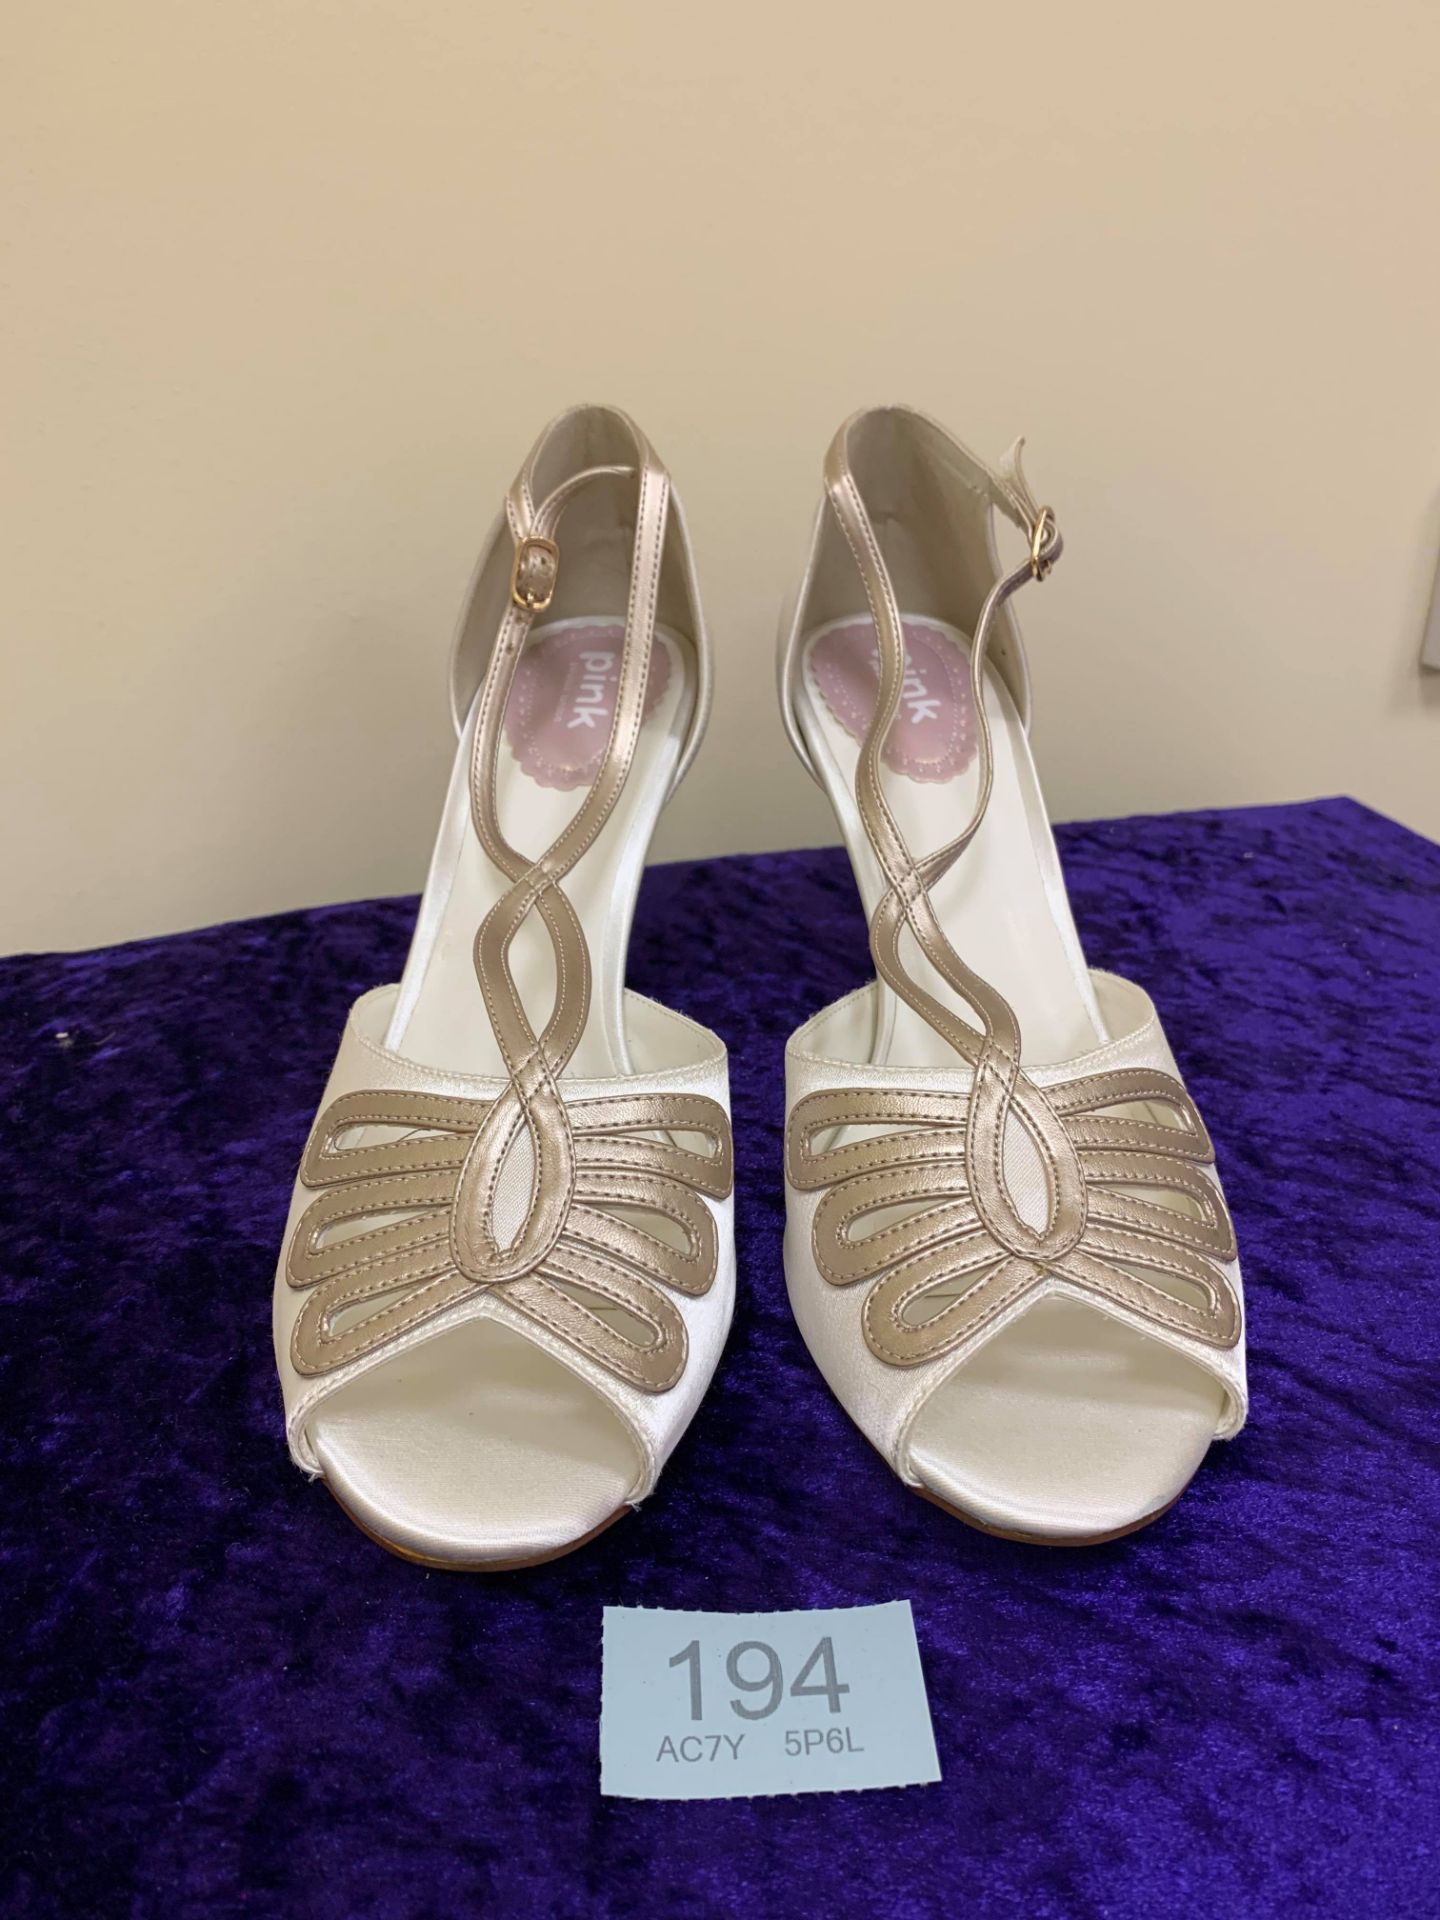 Designer Shoes Ivory/Champagne In Size 42. Code 195 - Image 2 of 7